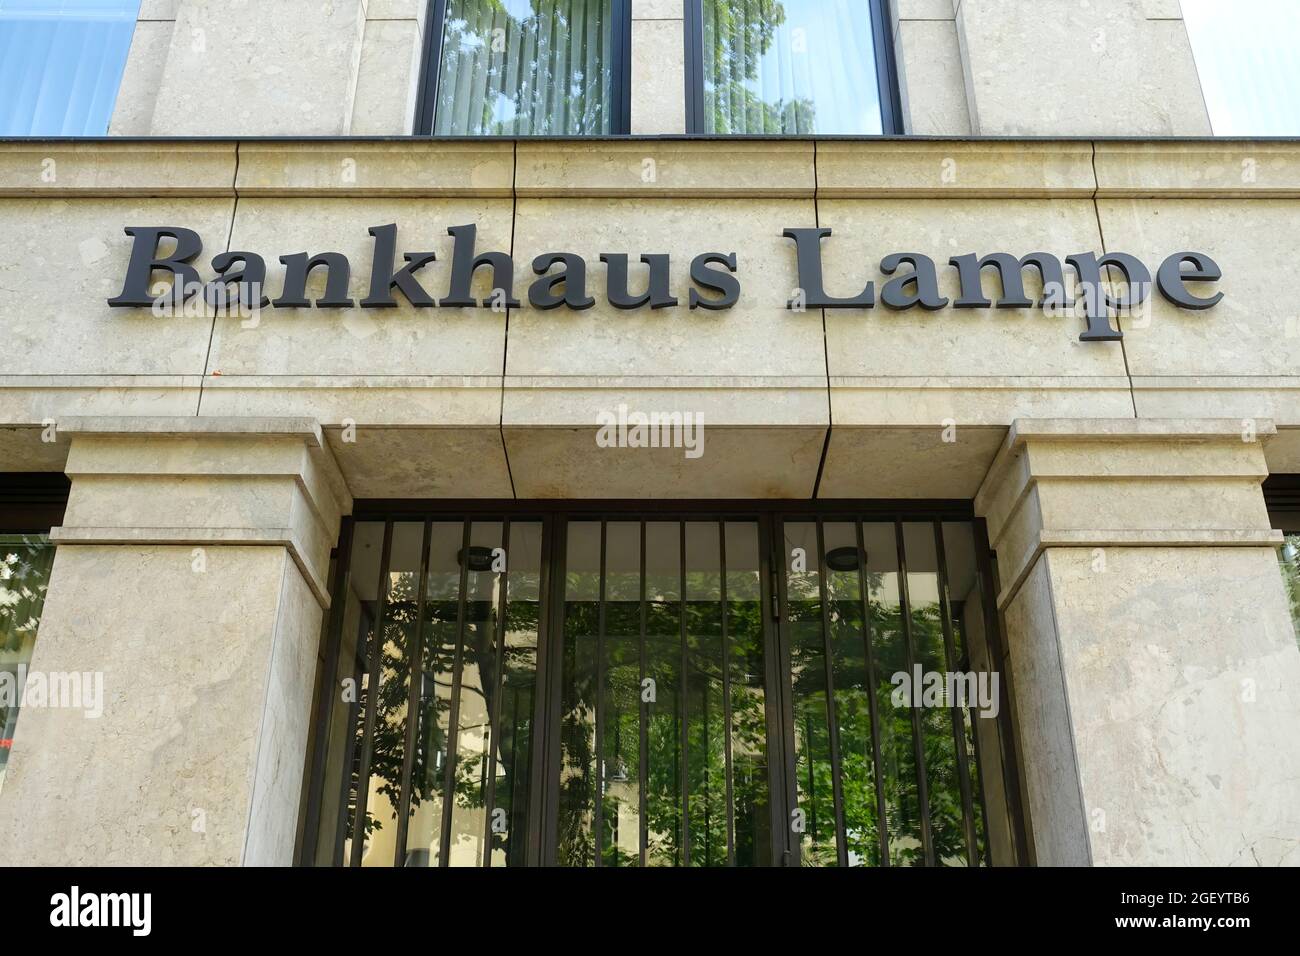 Bankhaus High Resolution Stock Photography and Images - Alamy